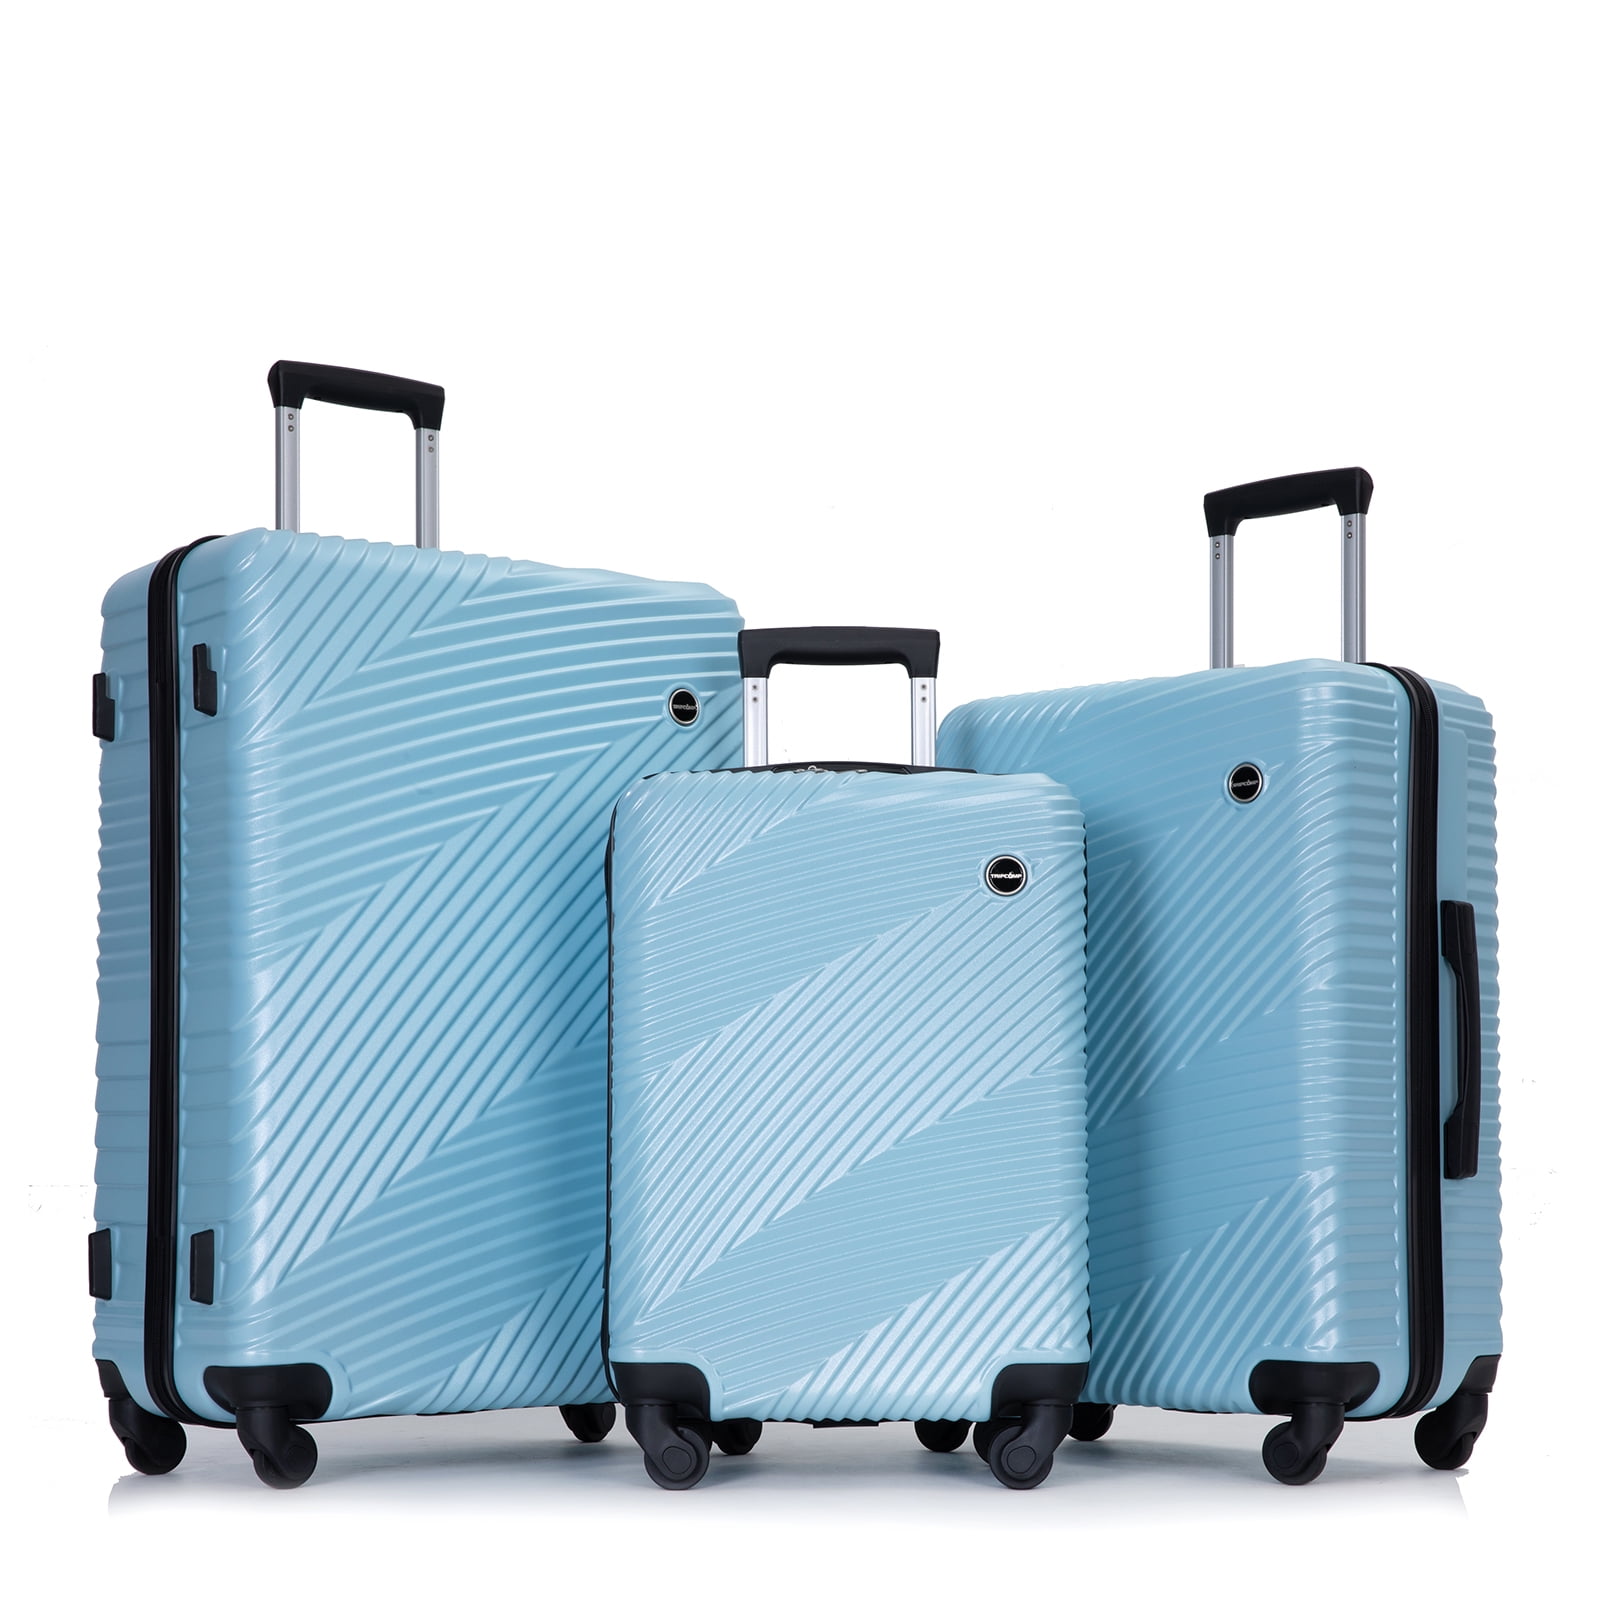 Traveler's Choice Granville II 2-Piece Luggage Set – RJP Unlimited